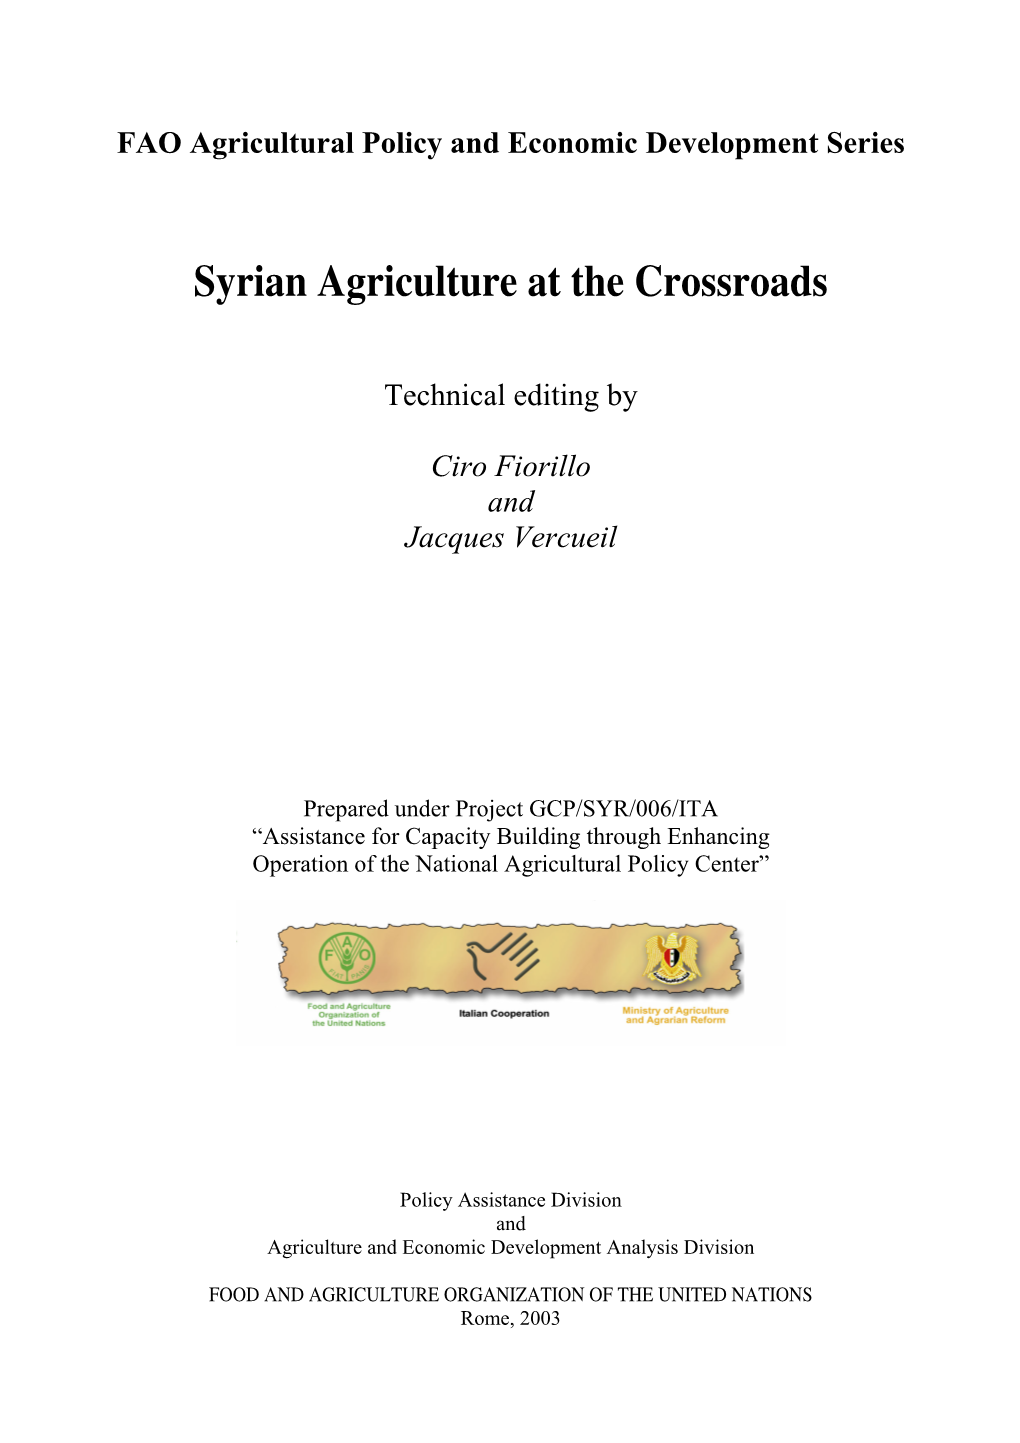 Syrian Agriculture at the Crossroads